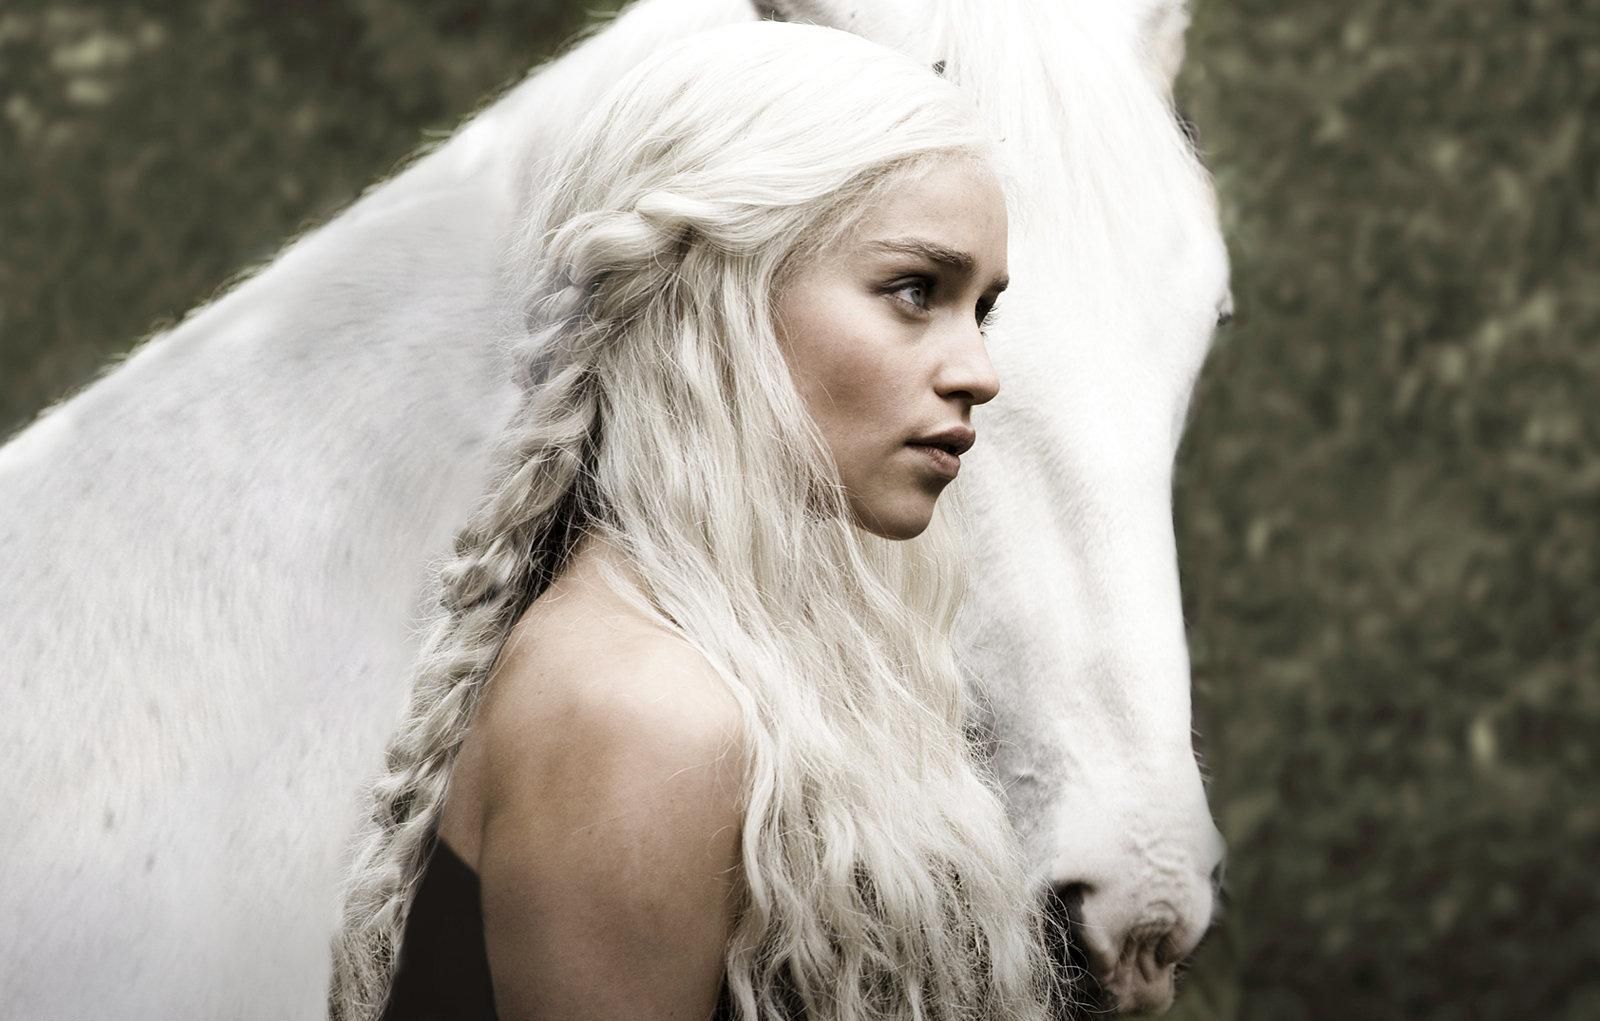 game of thrones season 5 begins 12 april in us 13 april uk no sky simulcast this time image 1